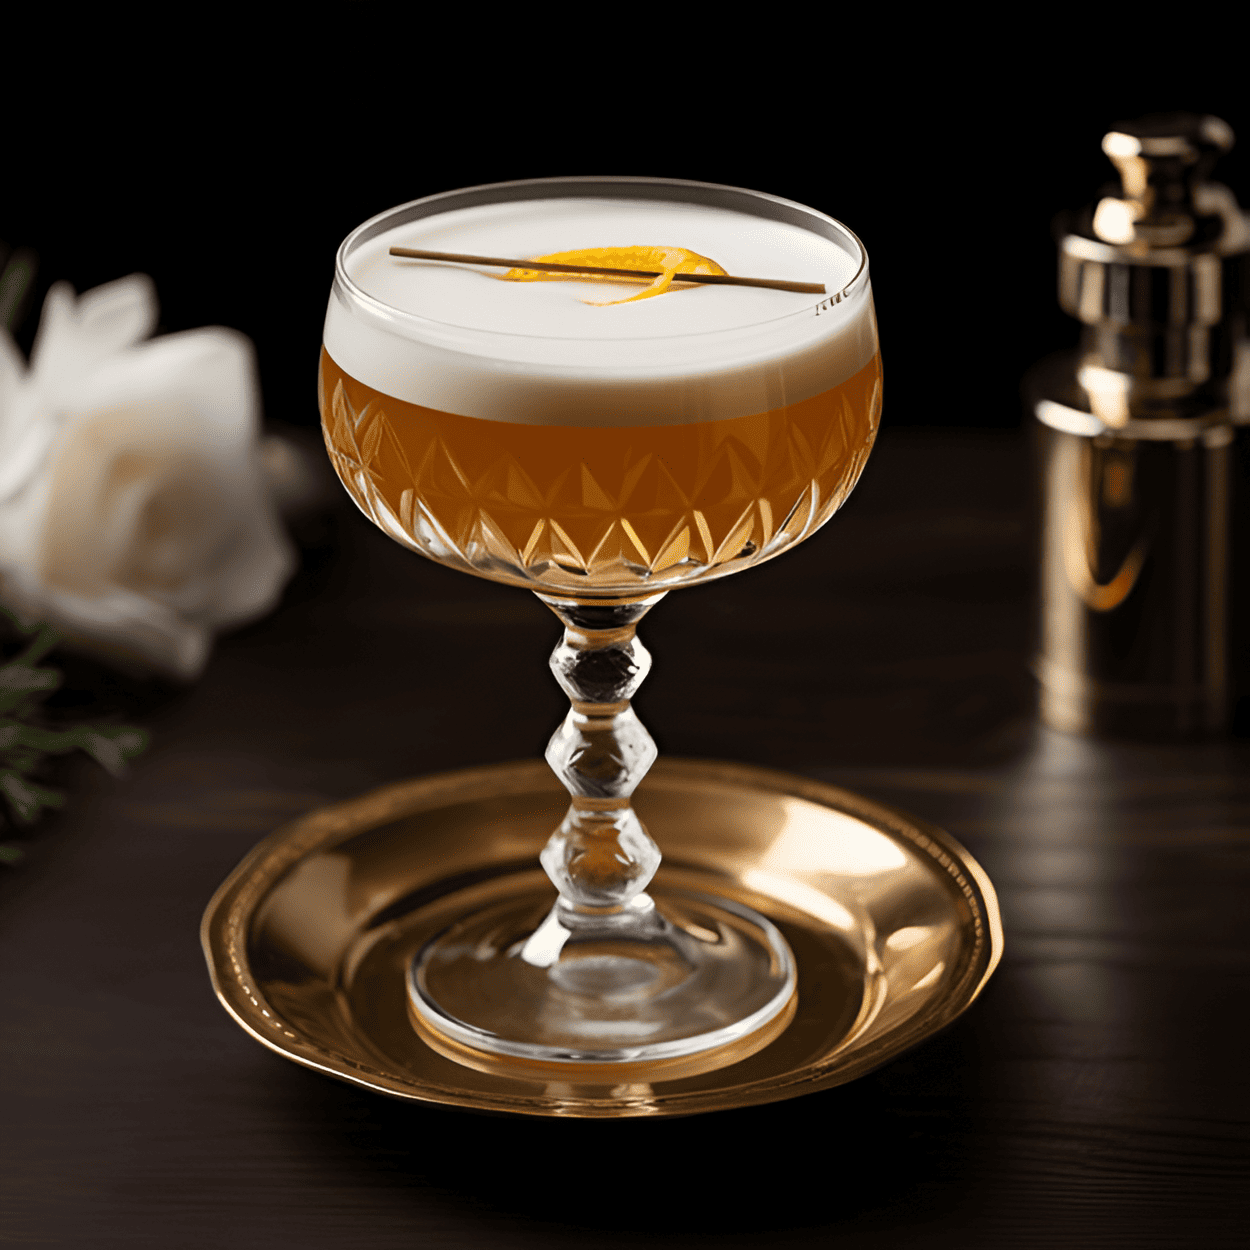 The Nikolashka cocktail has a complex and sophisticated taste, combining sweet, sour, and bitter flavors. It is a well-balanced drink with a smooth, velvety texture and a warming sensation from the cognac.